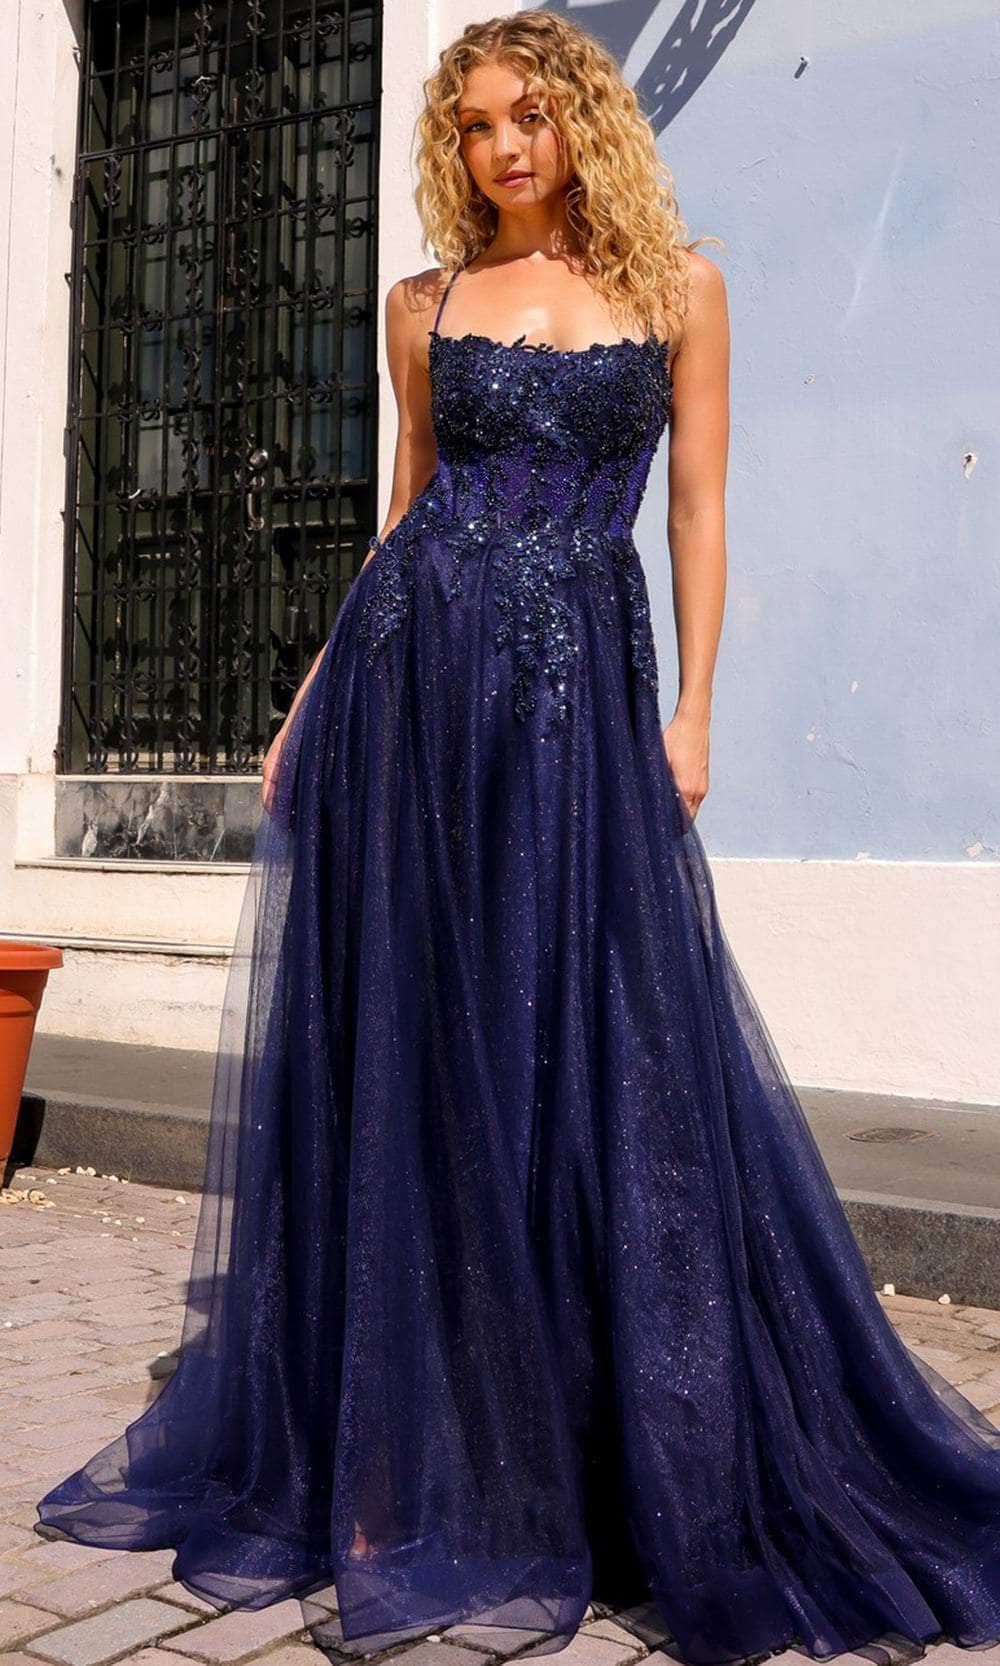 Nox Anabel G1405 - Scoop Lace Appliqued Prom Dress with Slit
